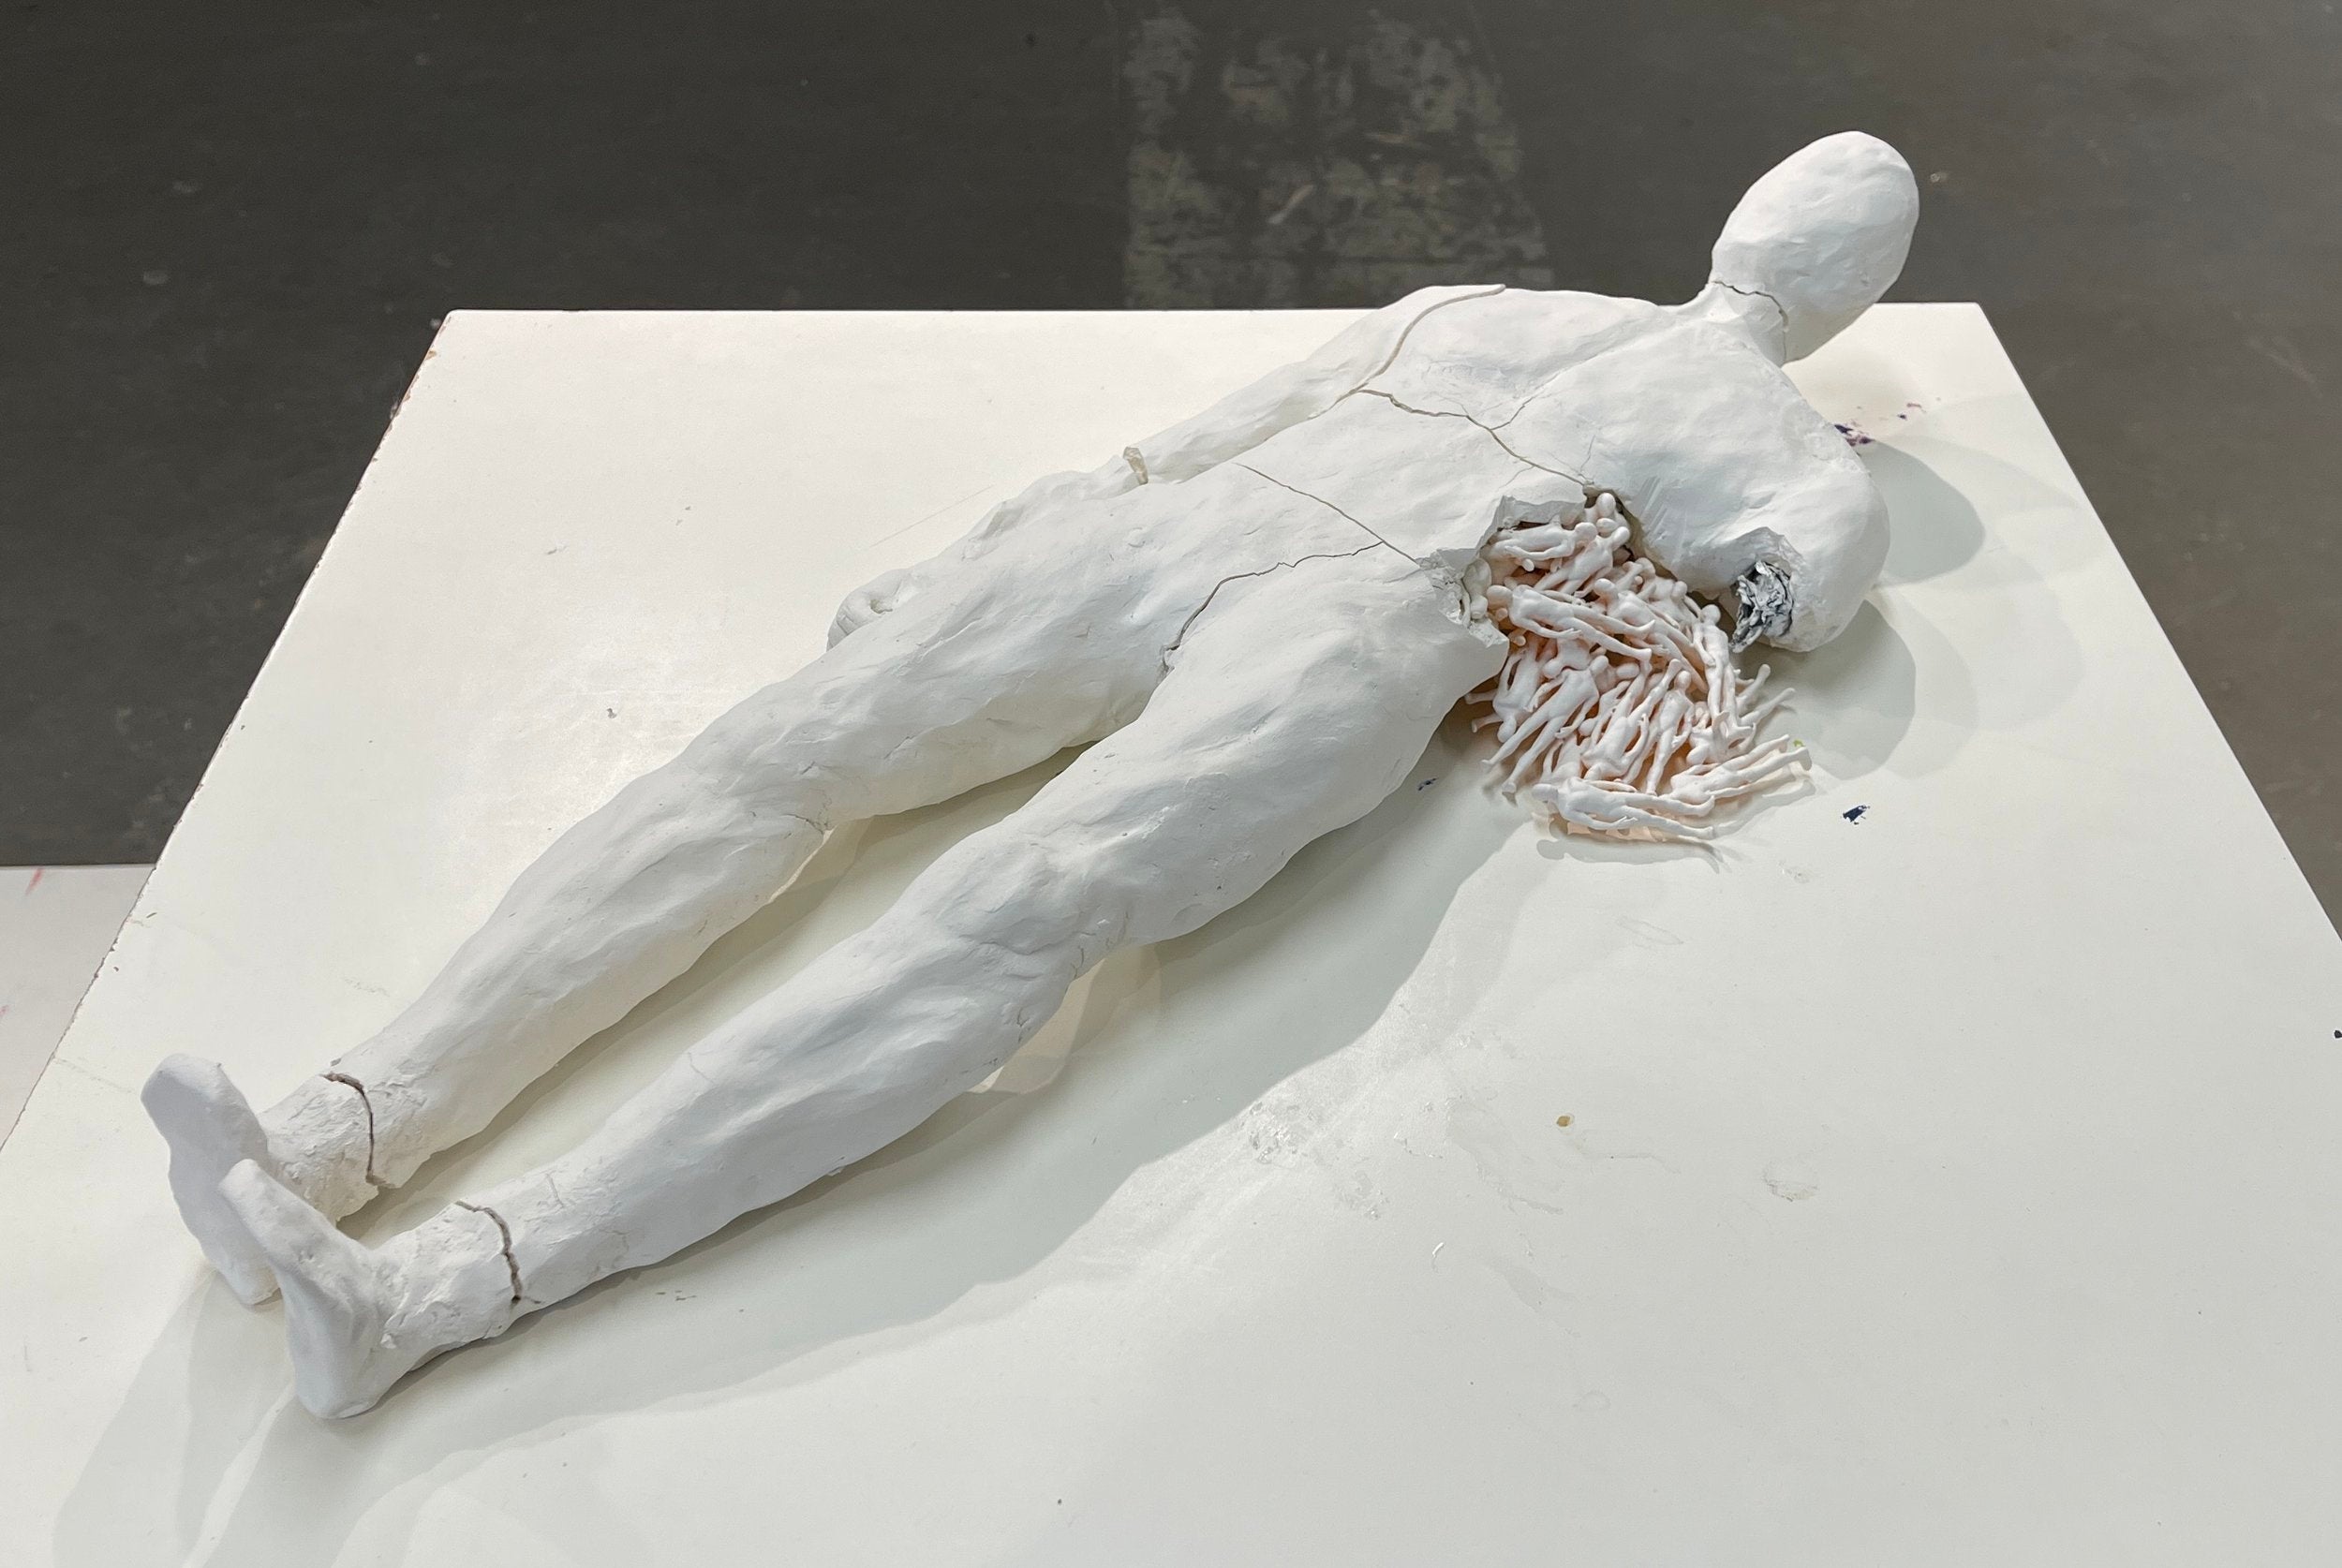 Sculpture of person lying down with a fracture on their side. From the fracture emerges smaller replicas of the larger sculpture.